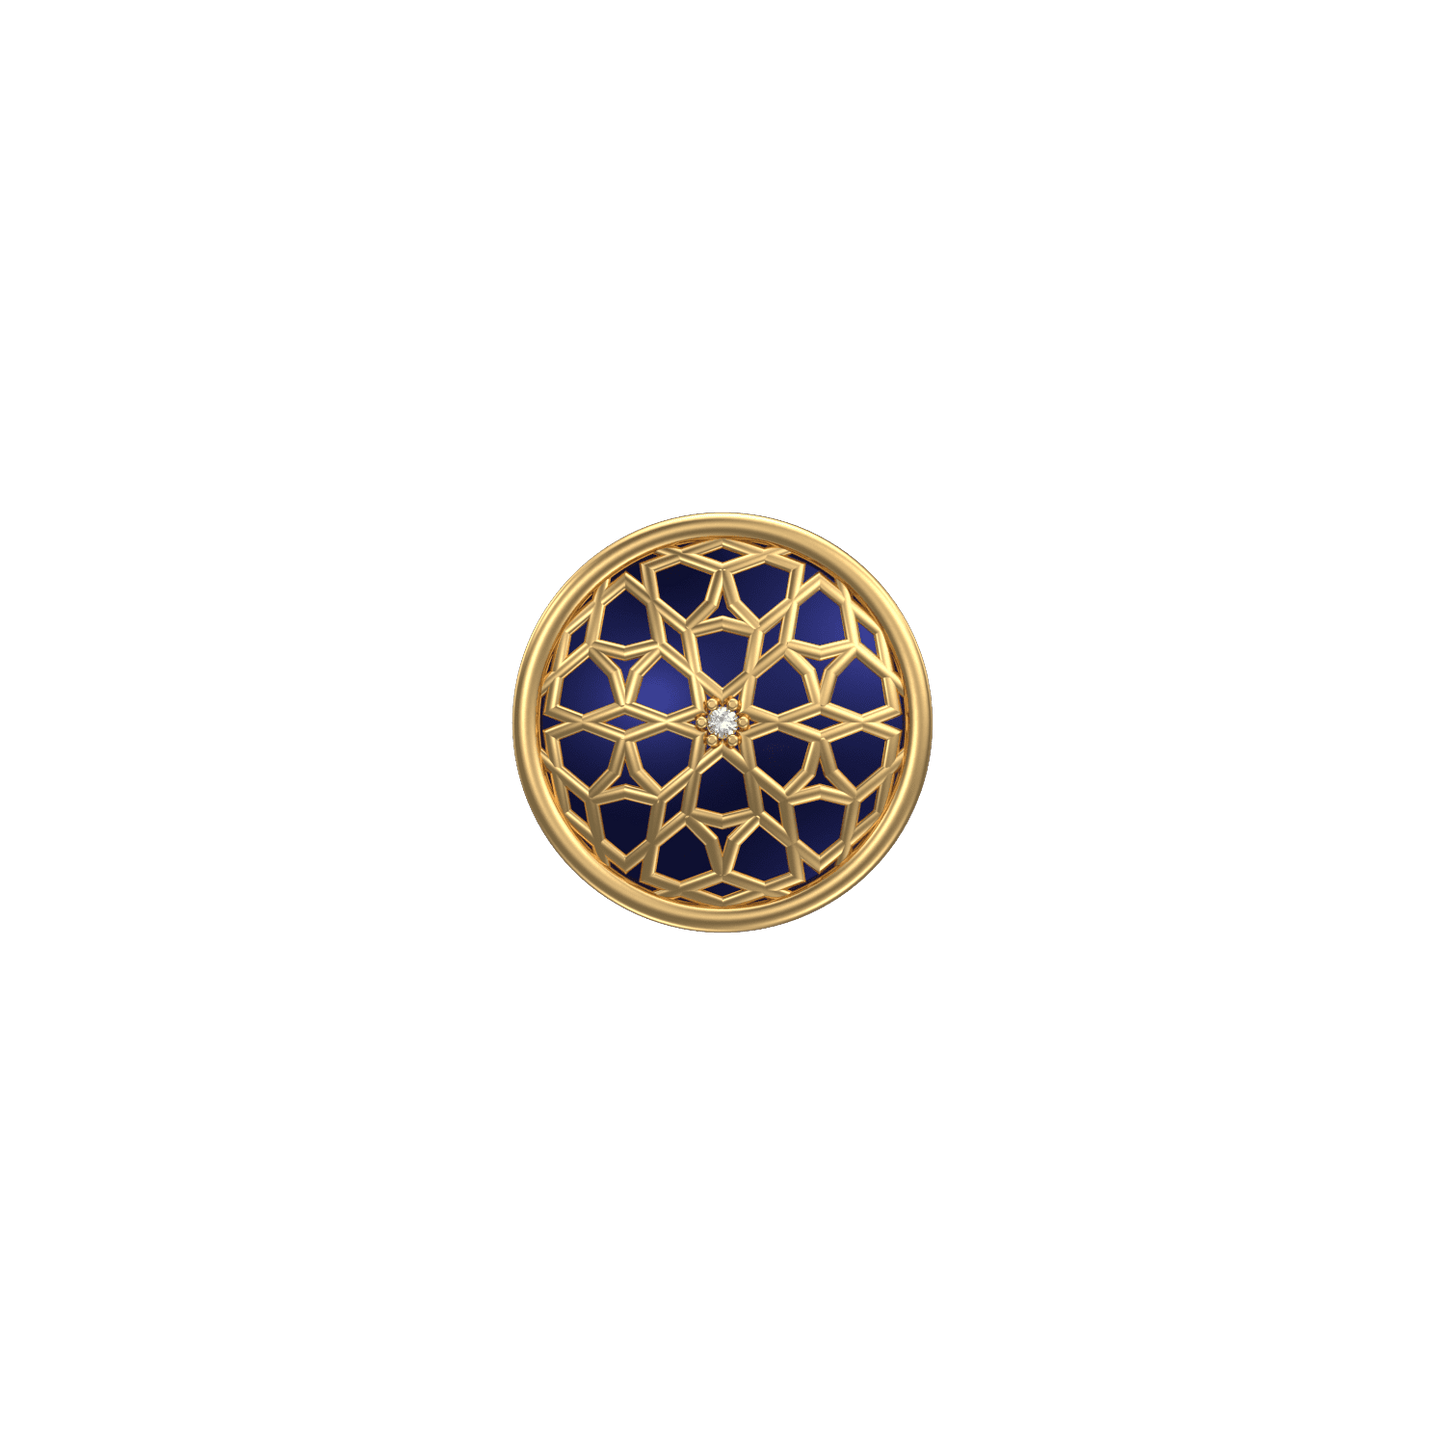 Starburst Luxe, Classic Kurta Button Set with CZ Diamonds, 18kt Gold Plating and Enamel.